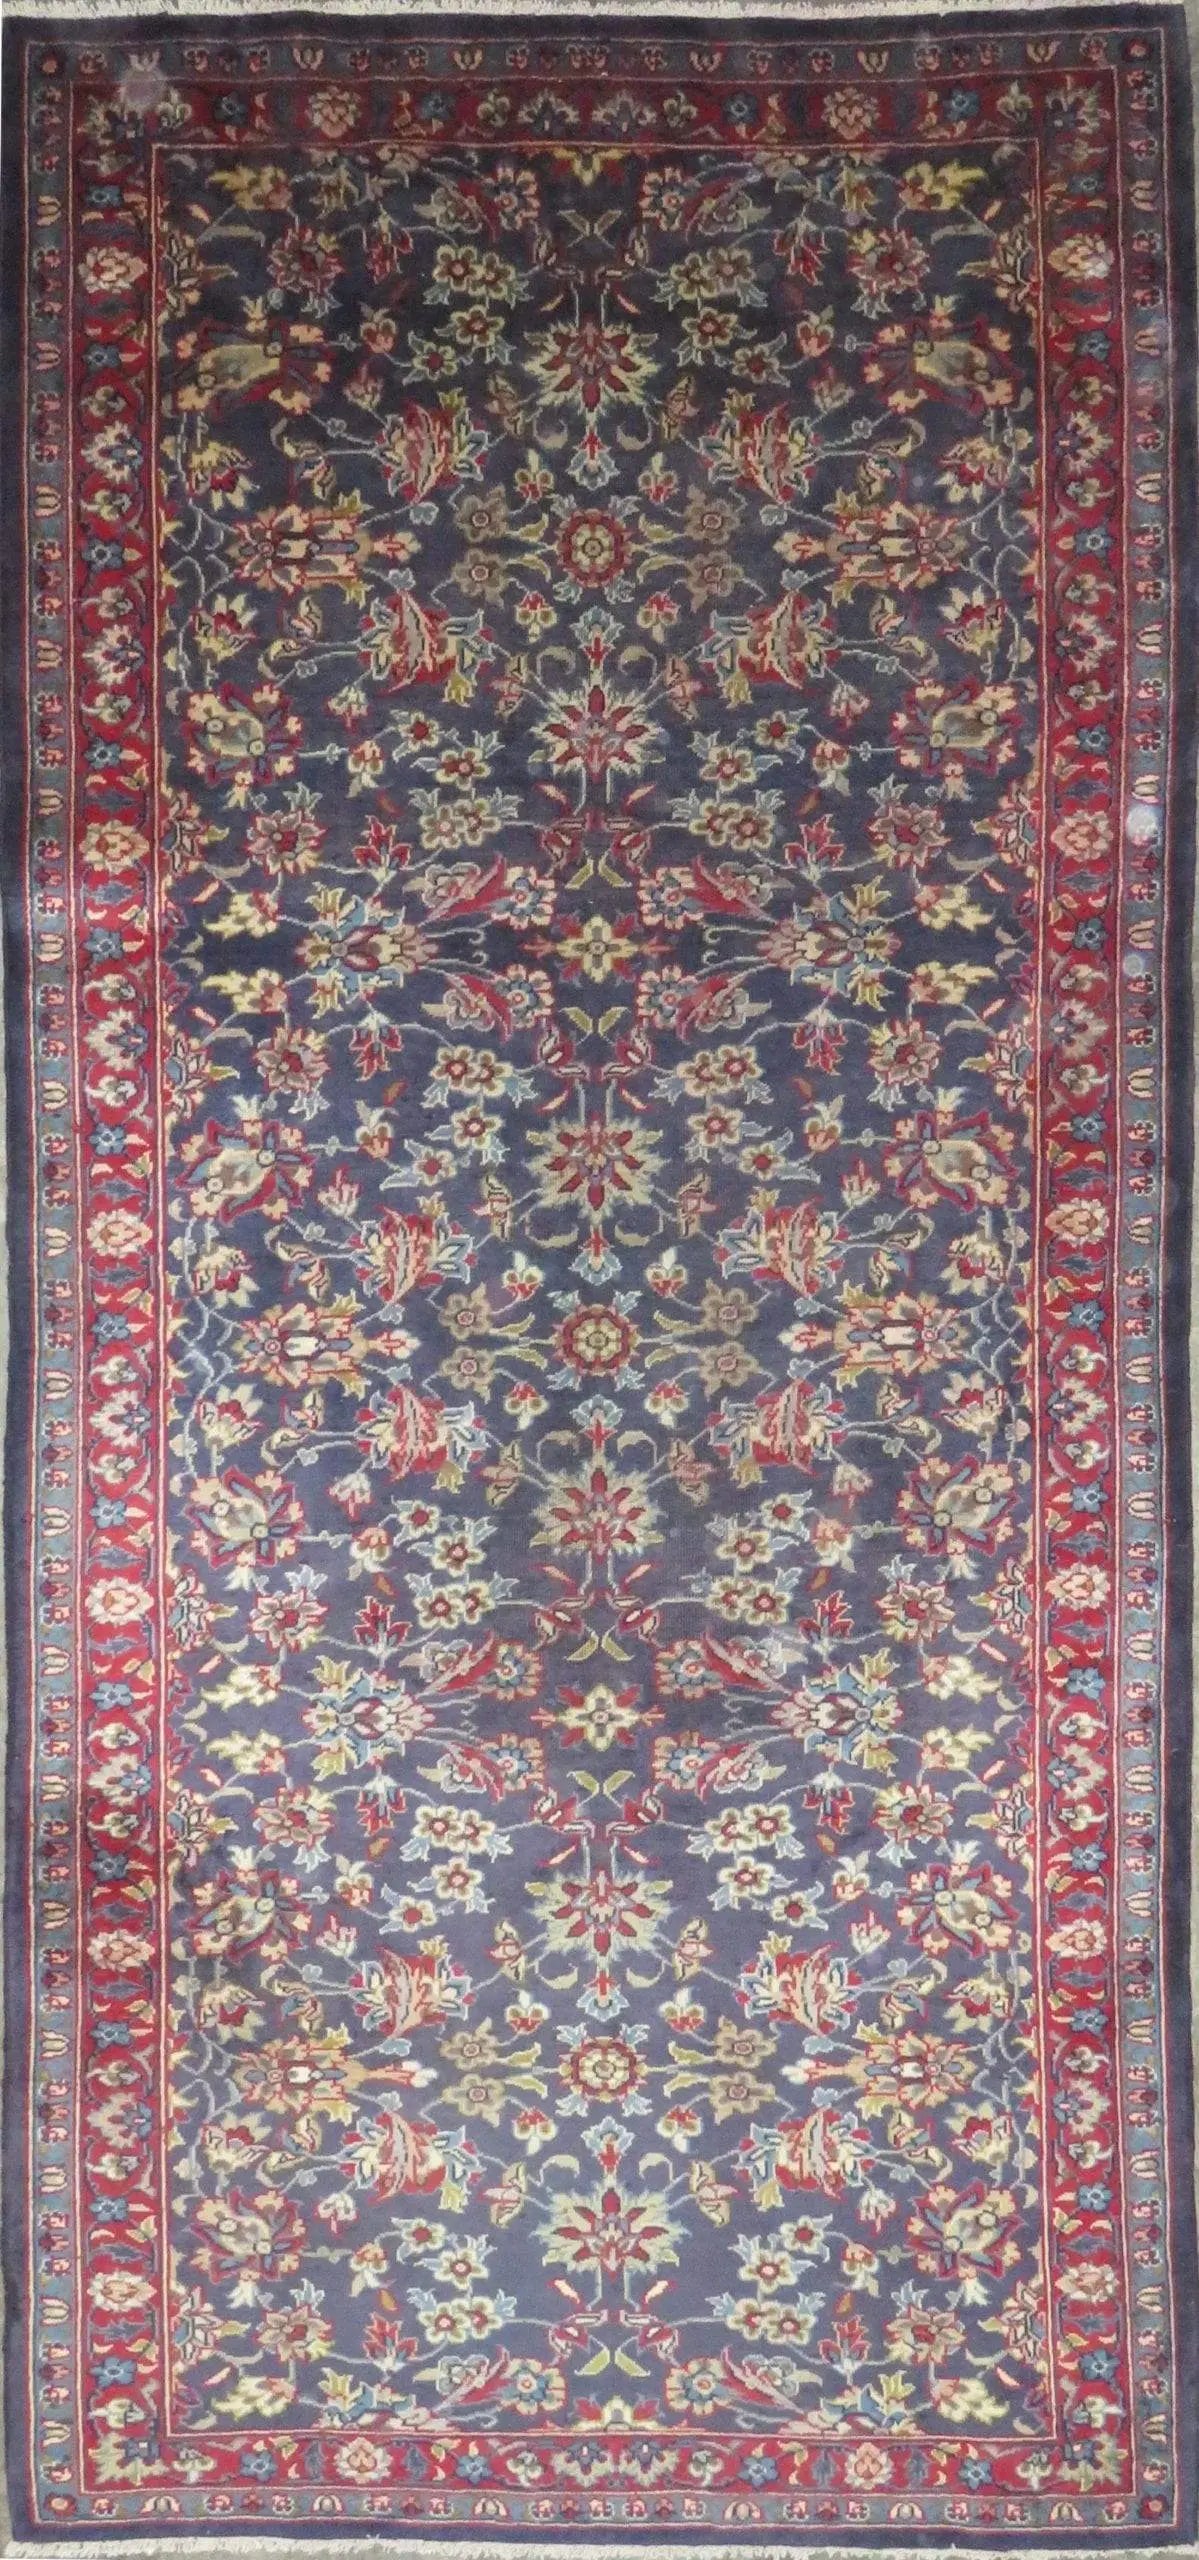 Hand-Knotted Persian Wool Rug _ Luxurious Vintage Design, 10'2" x 4'7", Artisan Crafted